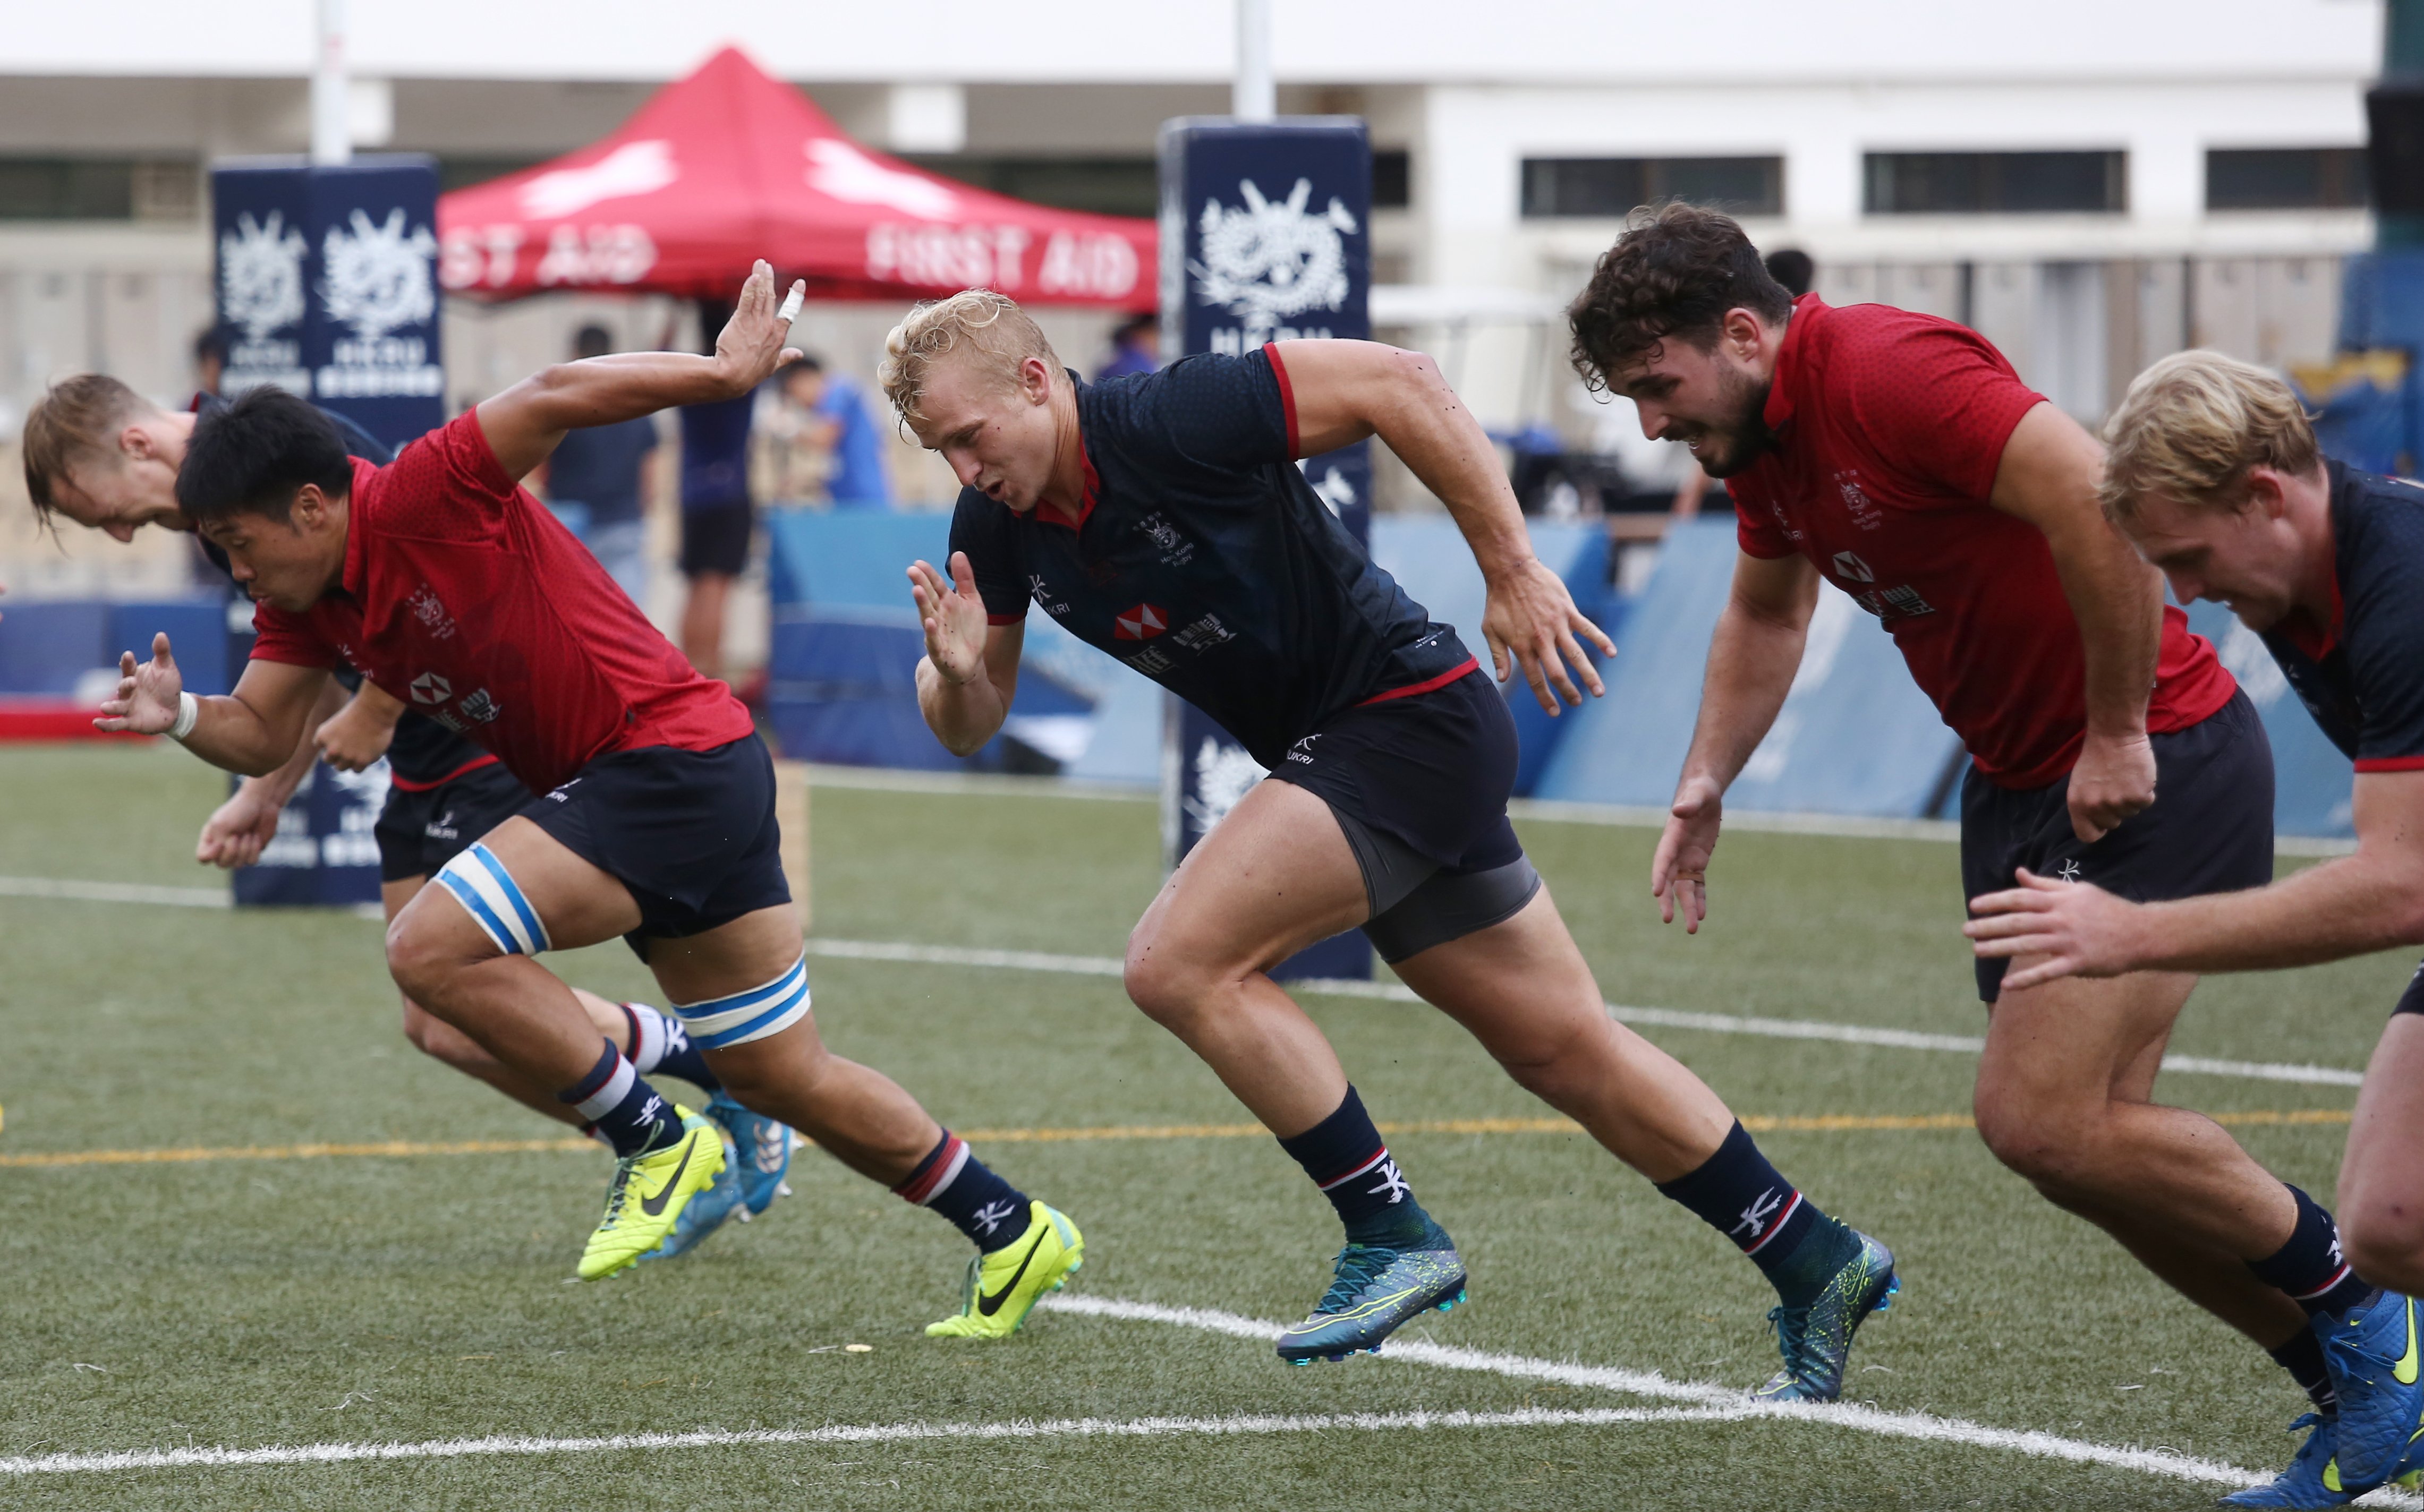 Hong Kong men's sevens squad captain Max Woodward (centre) trains with team-mates at King's Park in Ho Man Tin ahead of next weekend's Asia Rugby Sevens Qualifier for the Rio 2016 Olympics. Photos: Jonathan Wong/SCMP